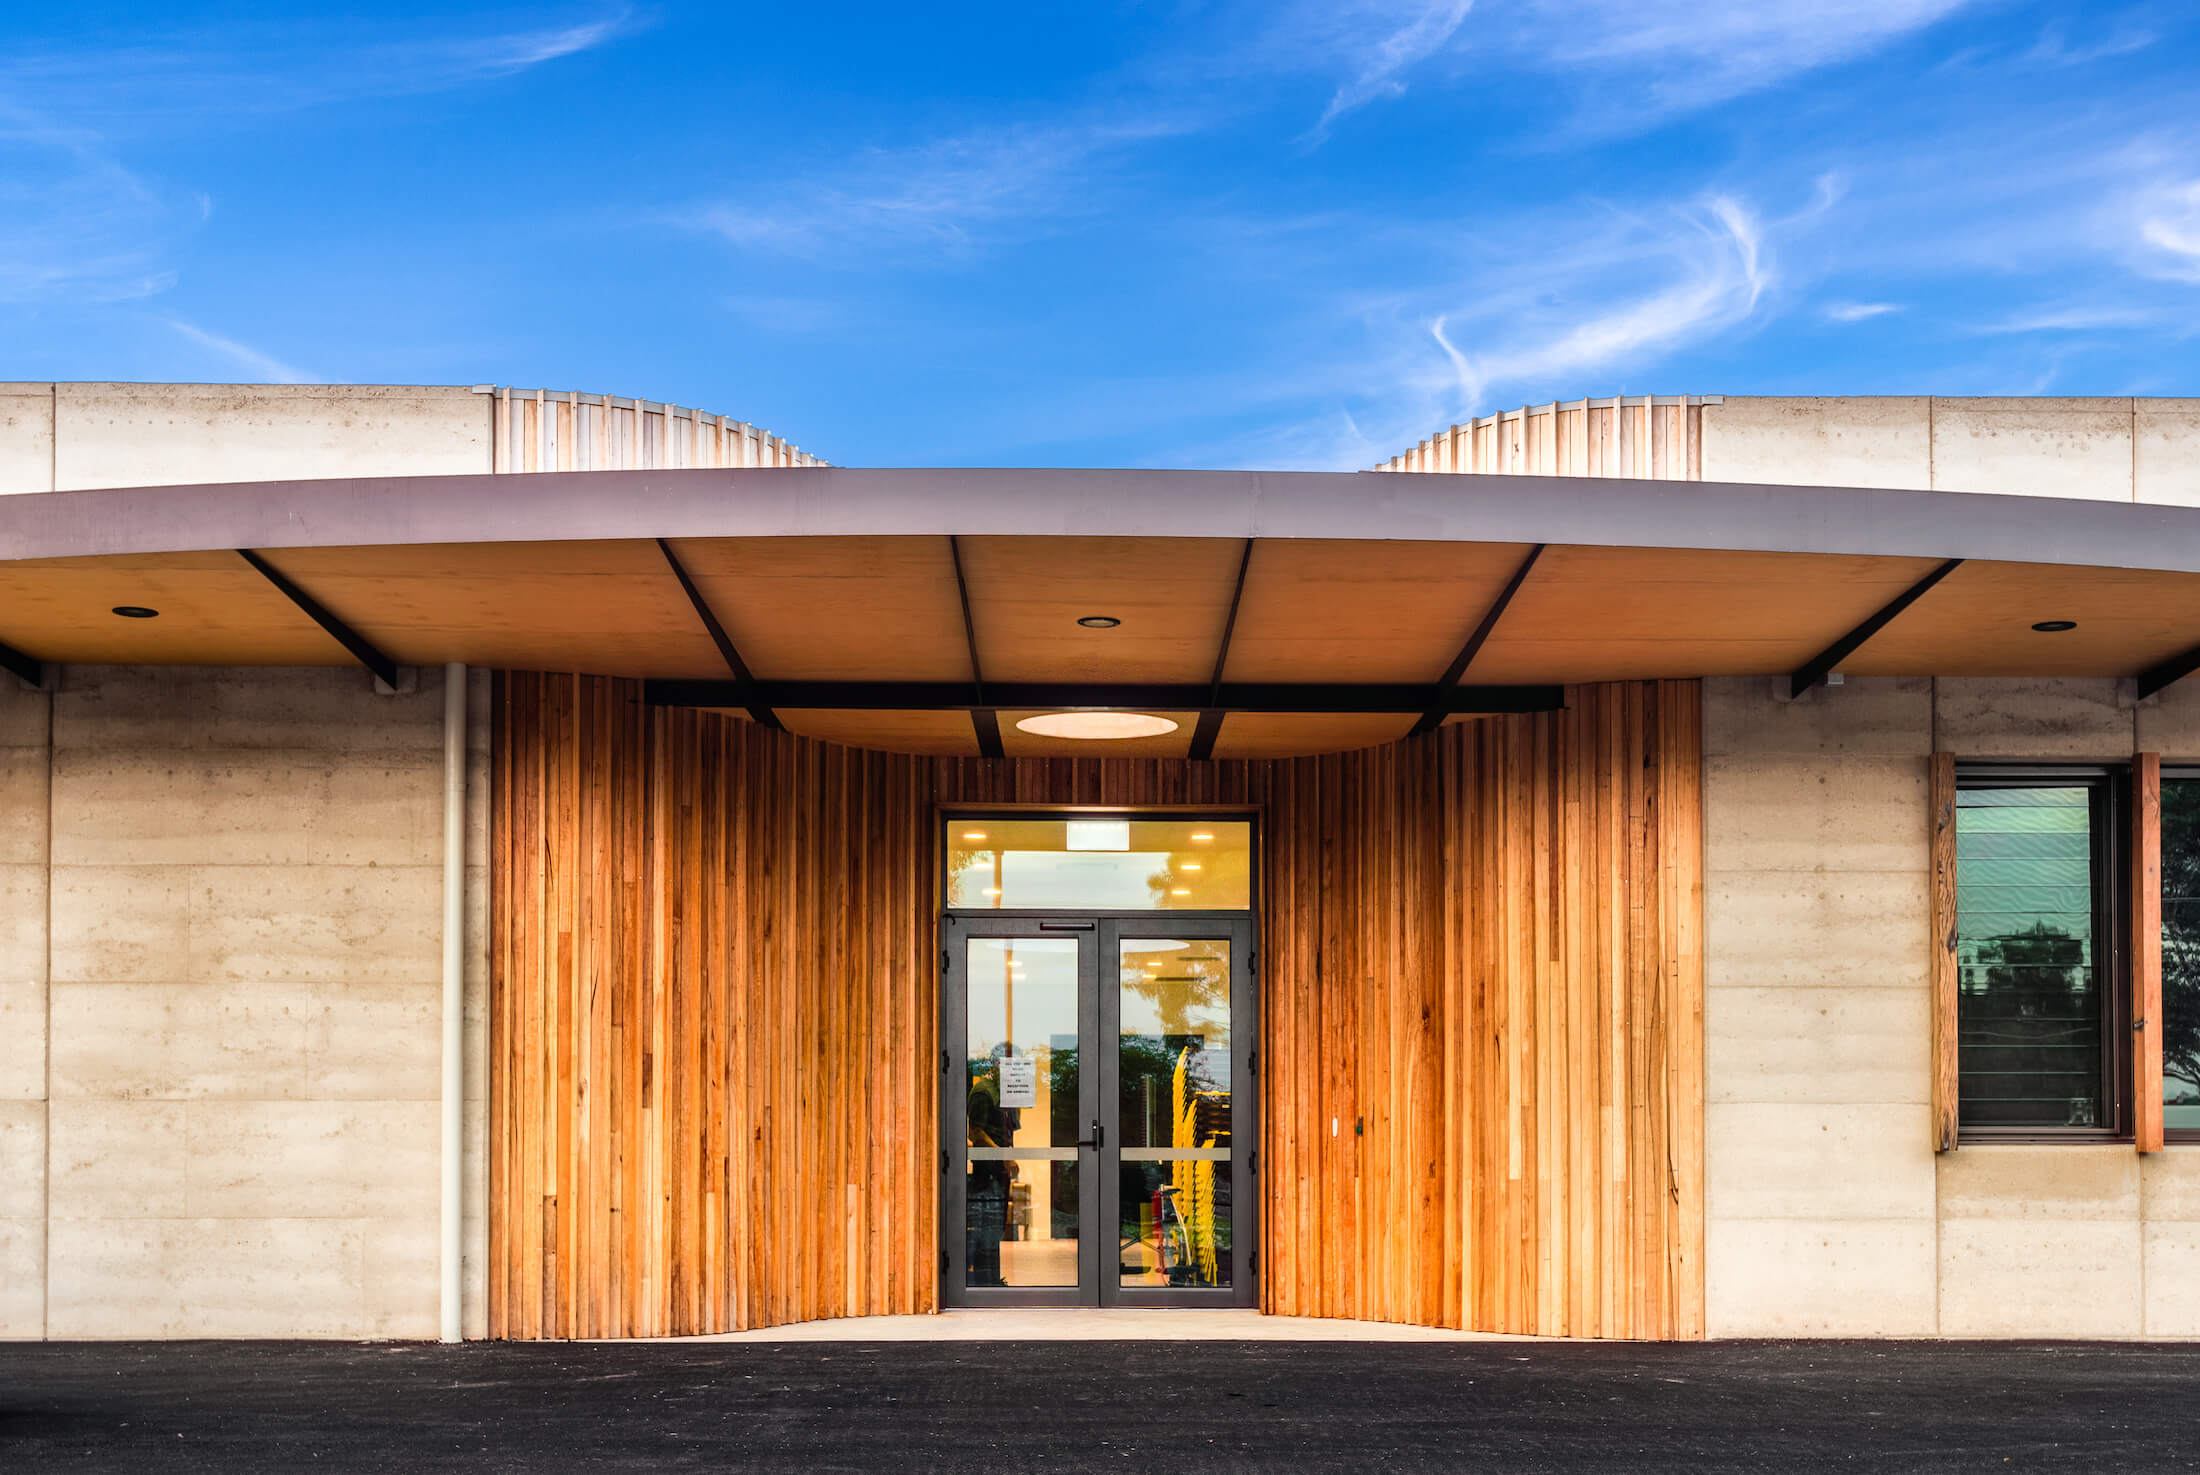 Timber feature cladding at community centre entry with canopy overhead